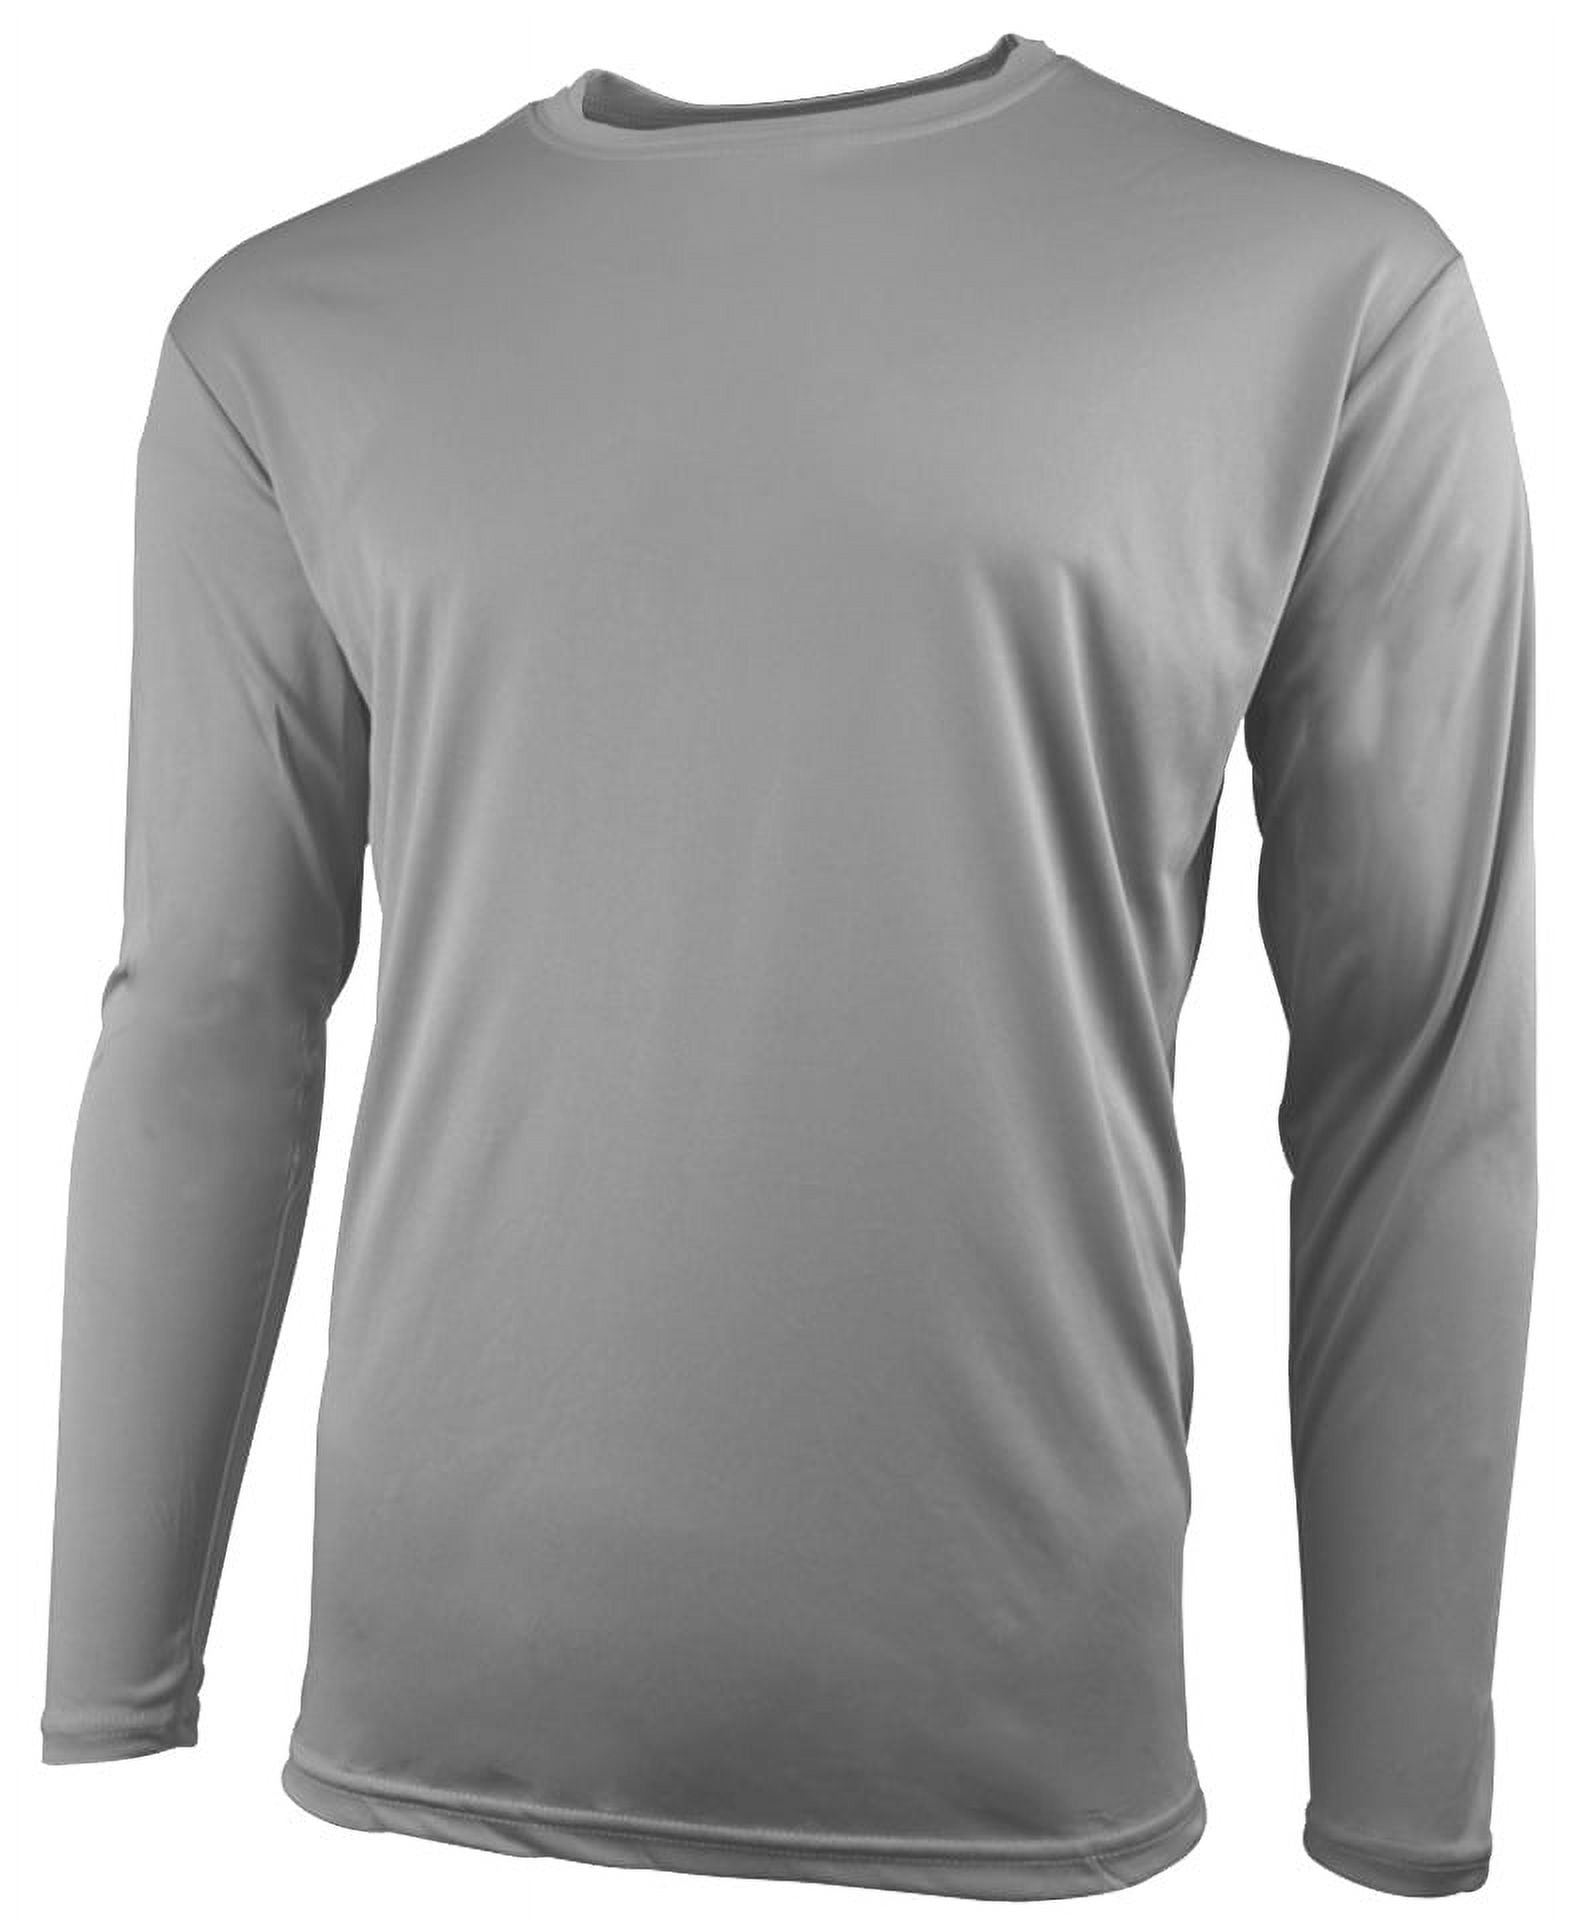 Epic Adult Cooling Performance Long Sleeve Crew T-Shirts (18